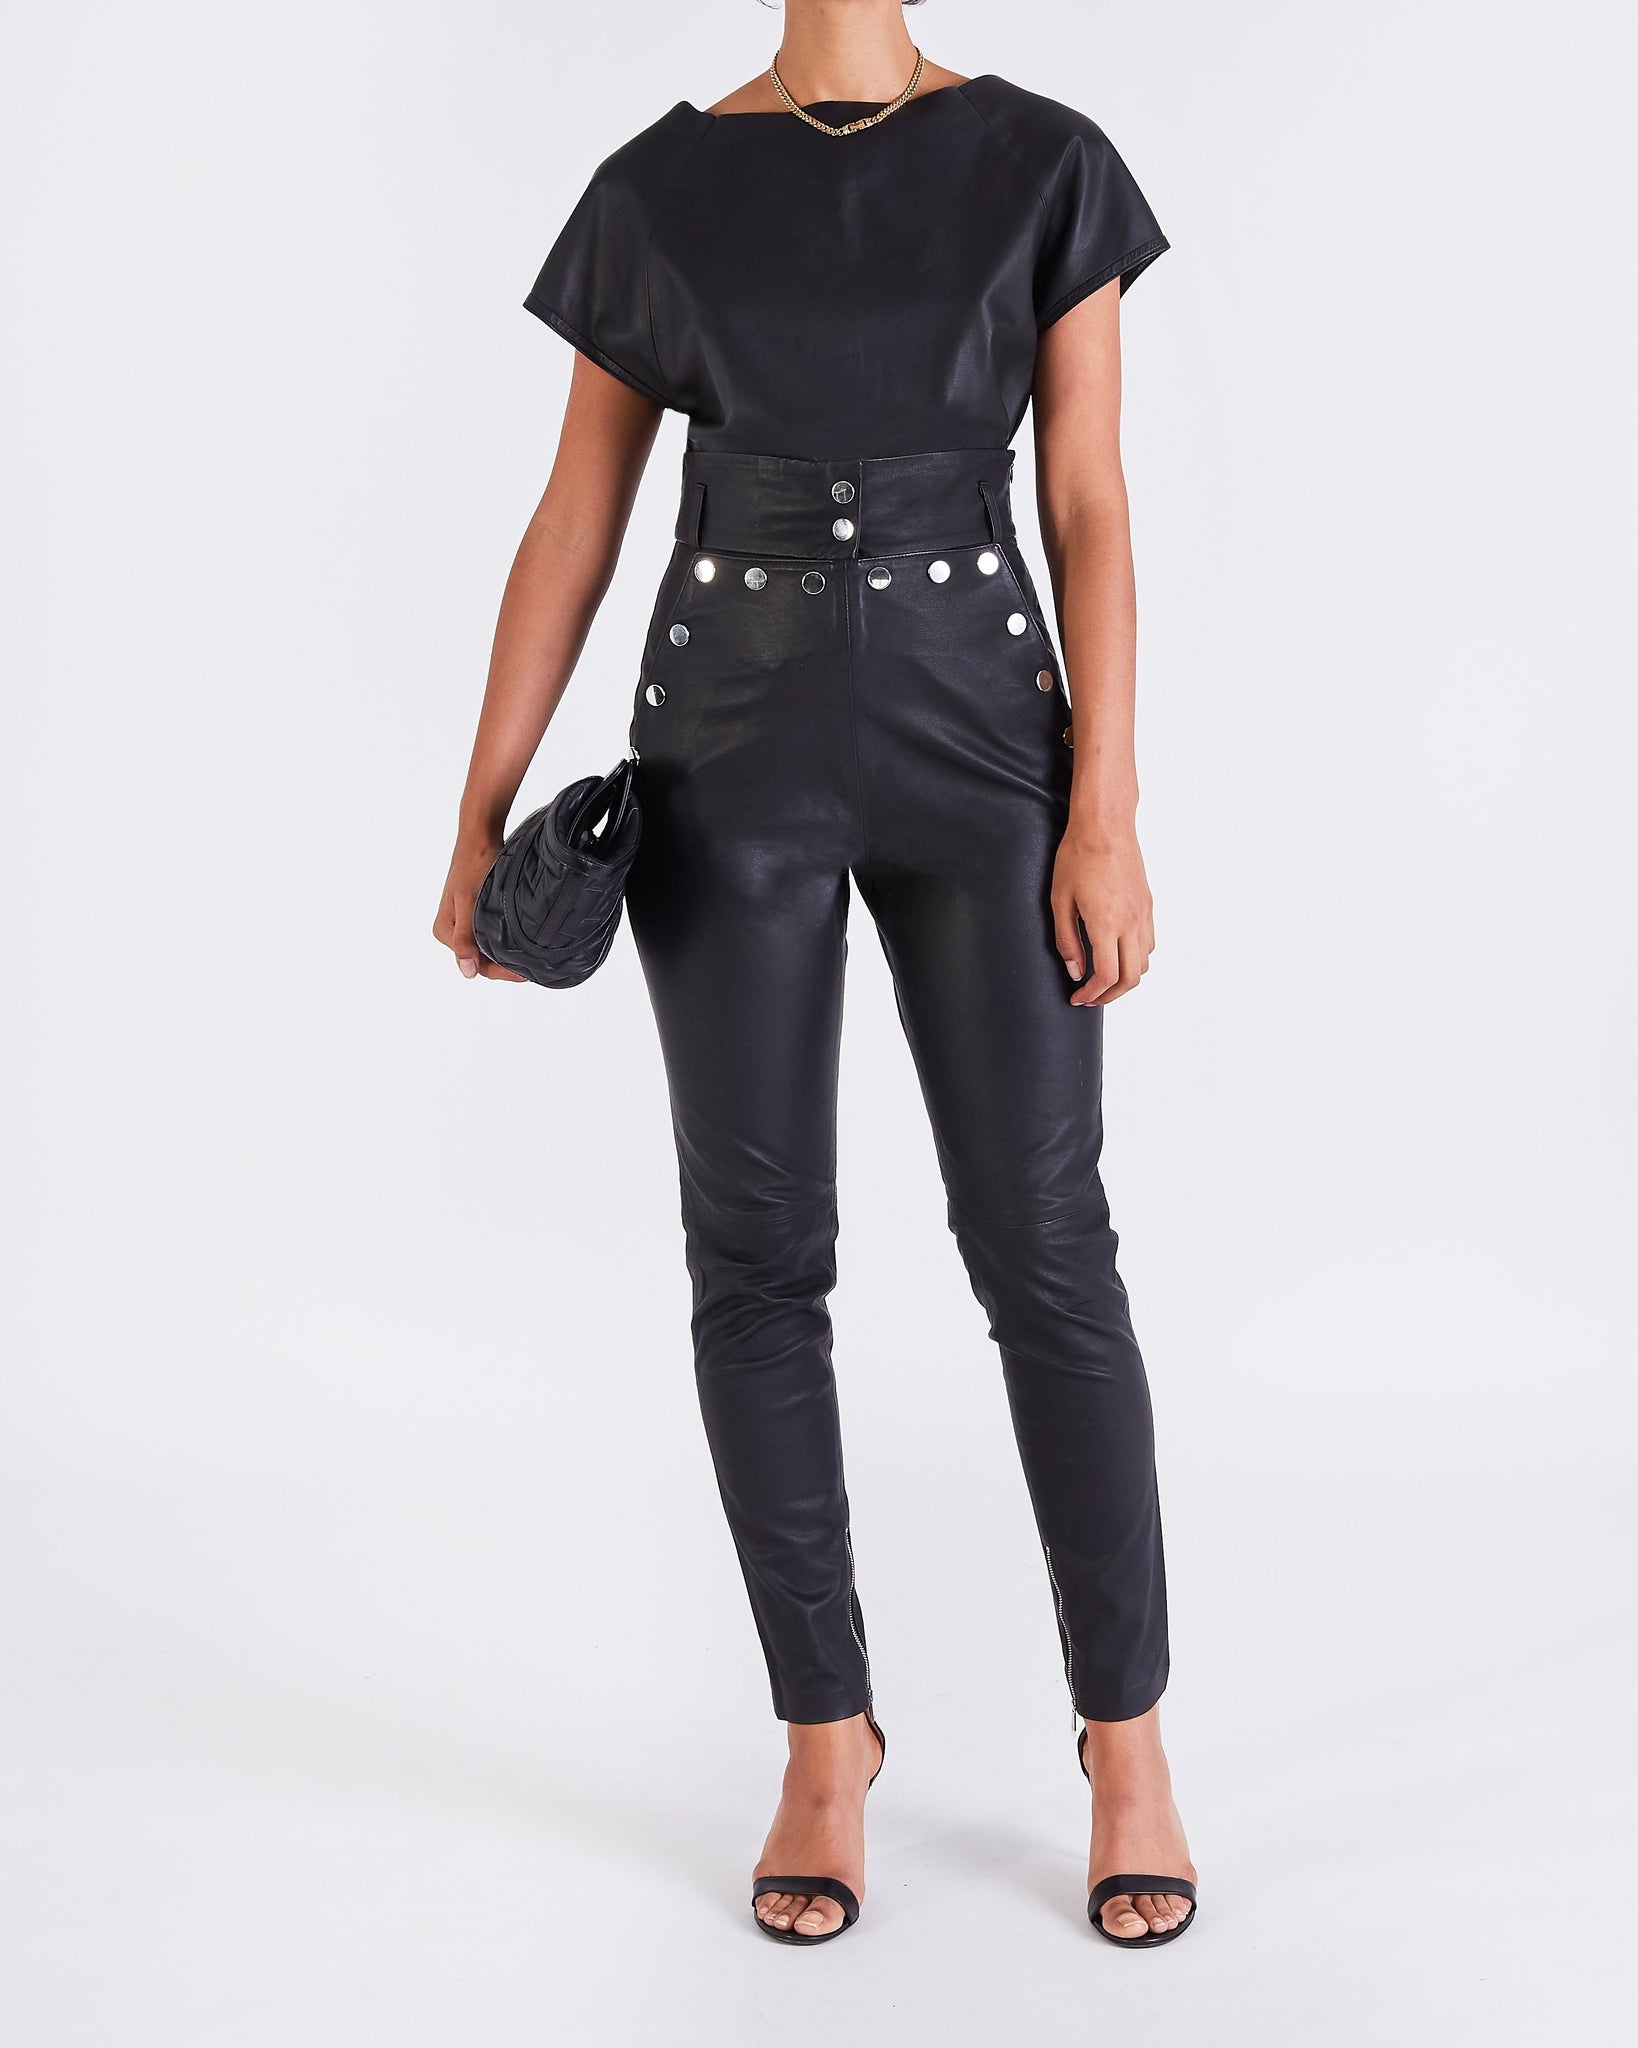 QUIZ Olive Leather-Look Zip Skinny Trousers | New Look